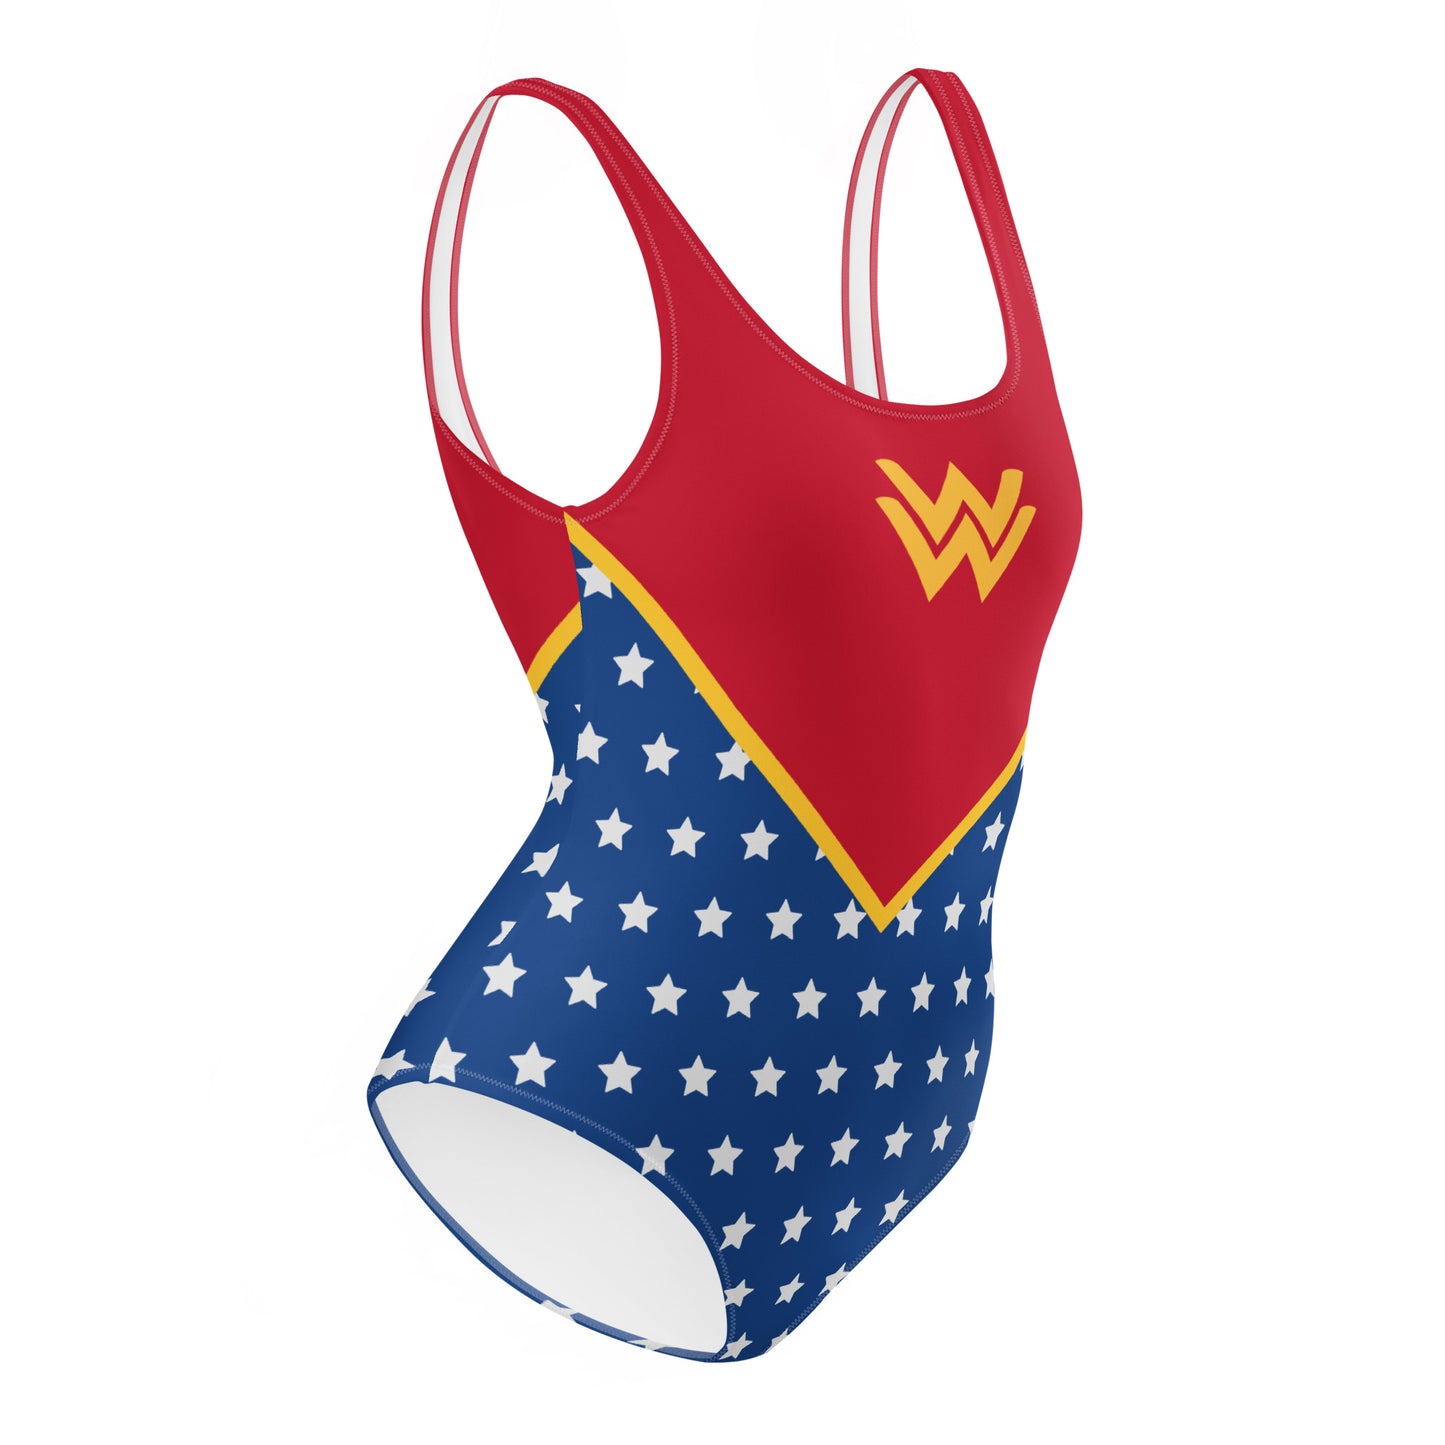 Diana Prince (Two) One-Piece Swimsuit